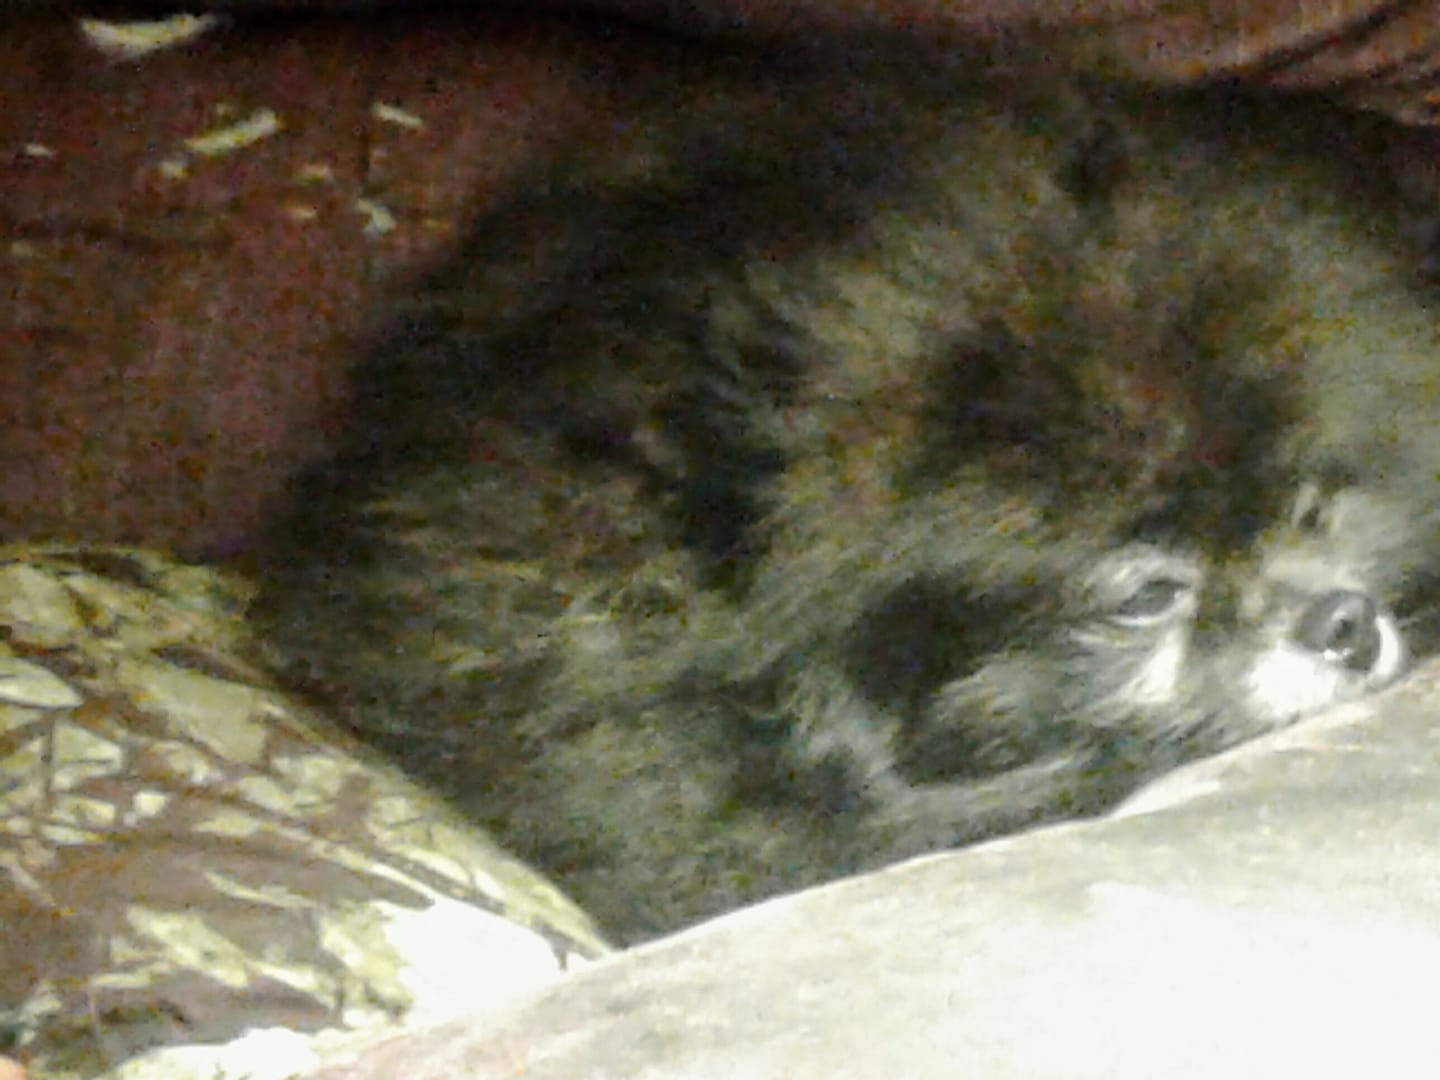 A Pomeranian named Cocoa Puff curled up lying on the bed